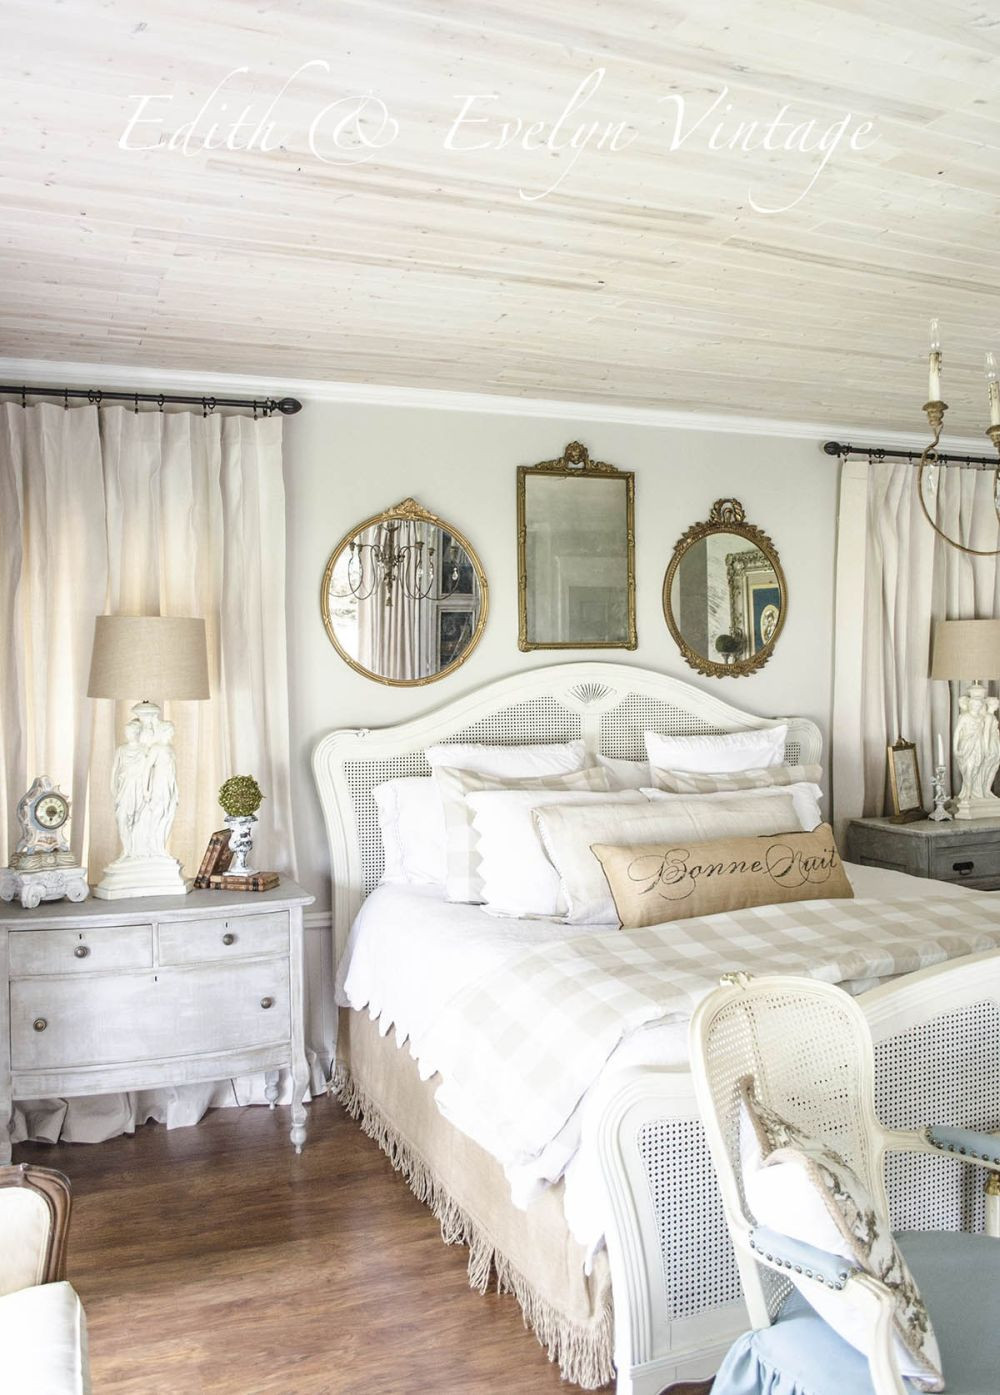 Country Bedroom Decorating
 10 Tips for Creating The Most Relaxing French Country